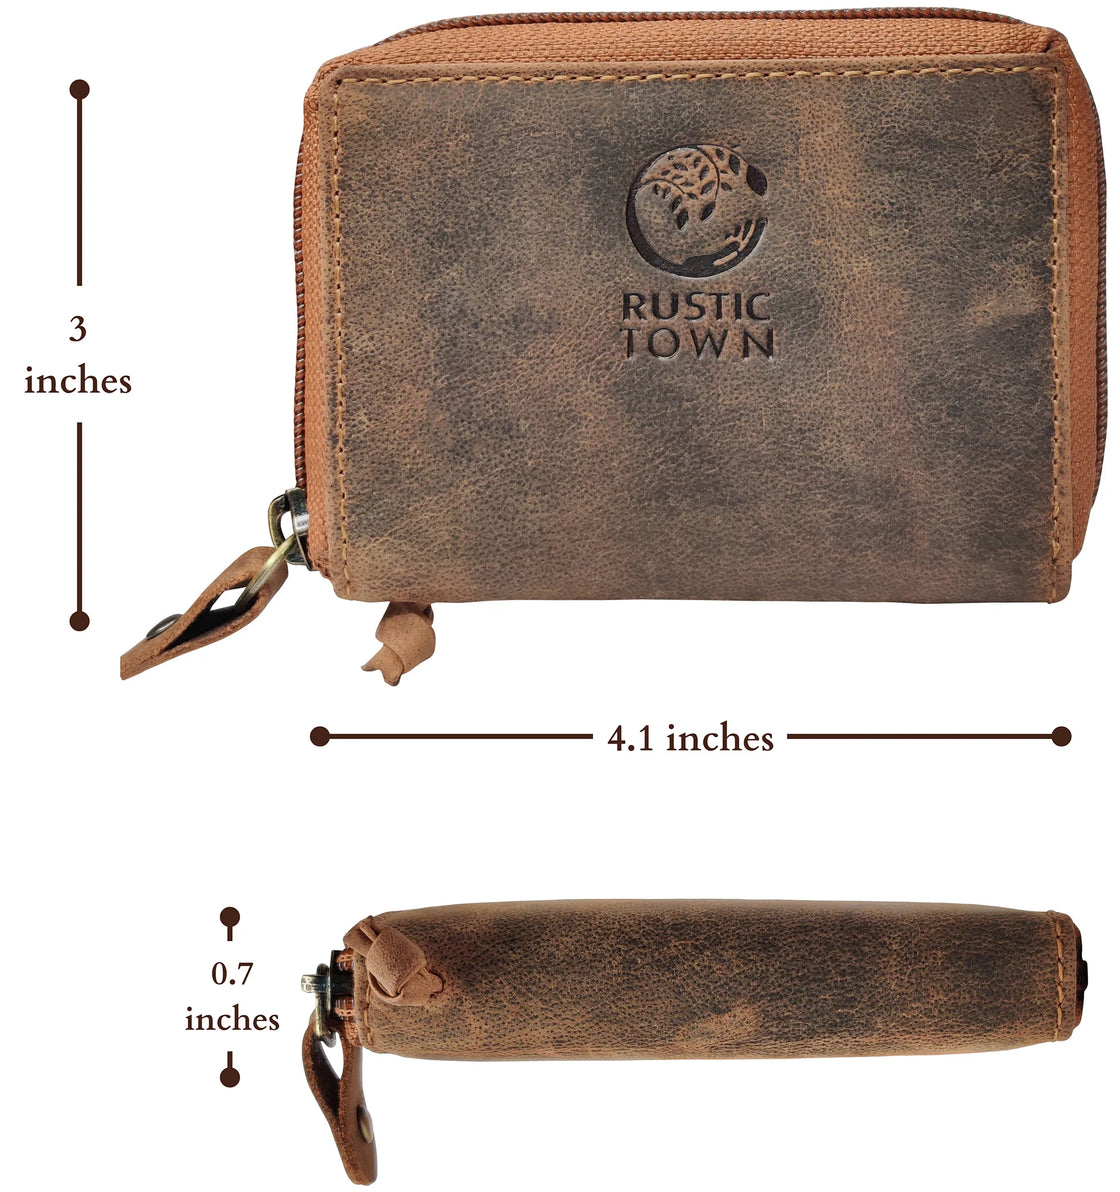  RUSTIC TOWN Slim Compact Leather Key Holder Wallet